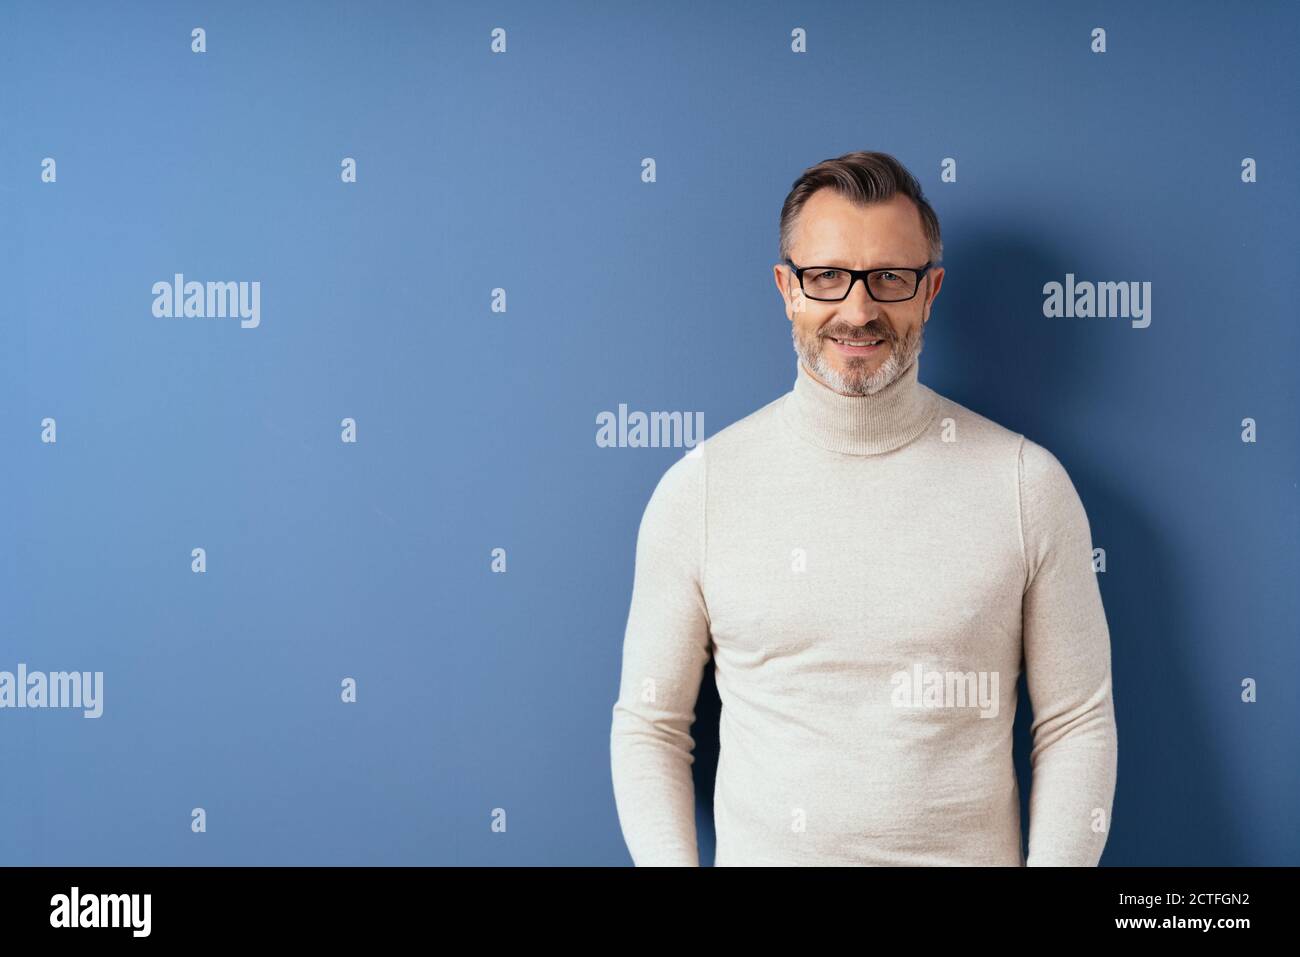 Half-length front portrait of a smiling handsome middle-aged man in white turtleneck against blue wall background with copy space Stock Photo